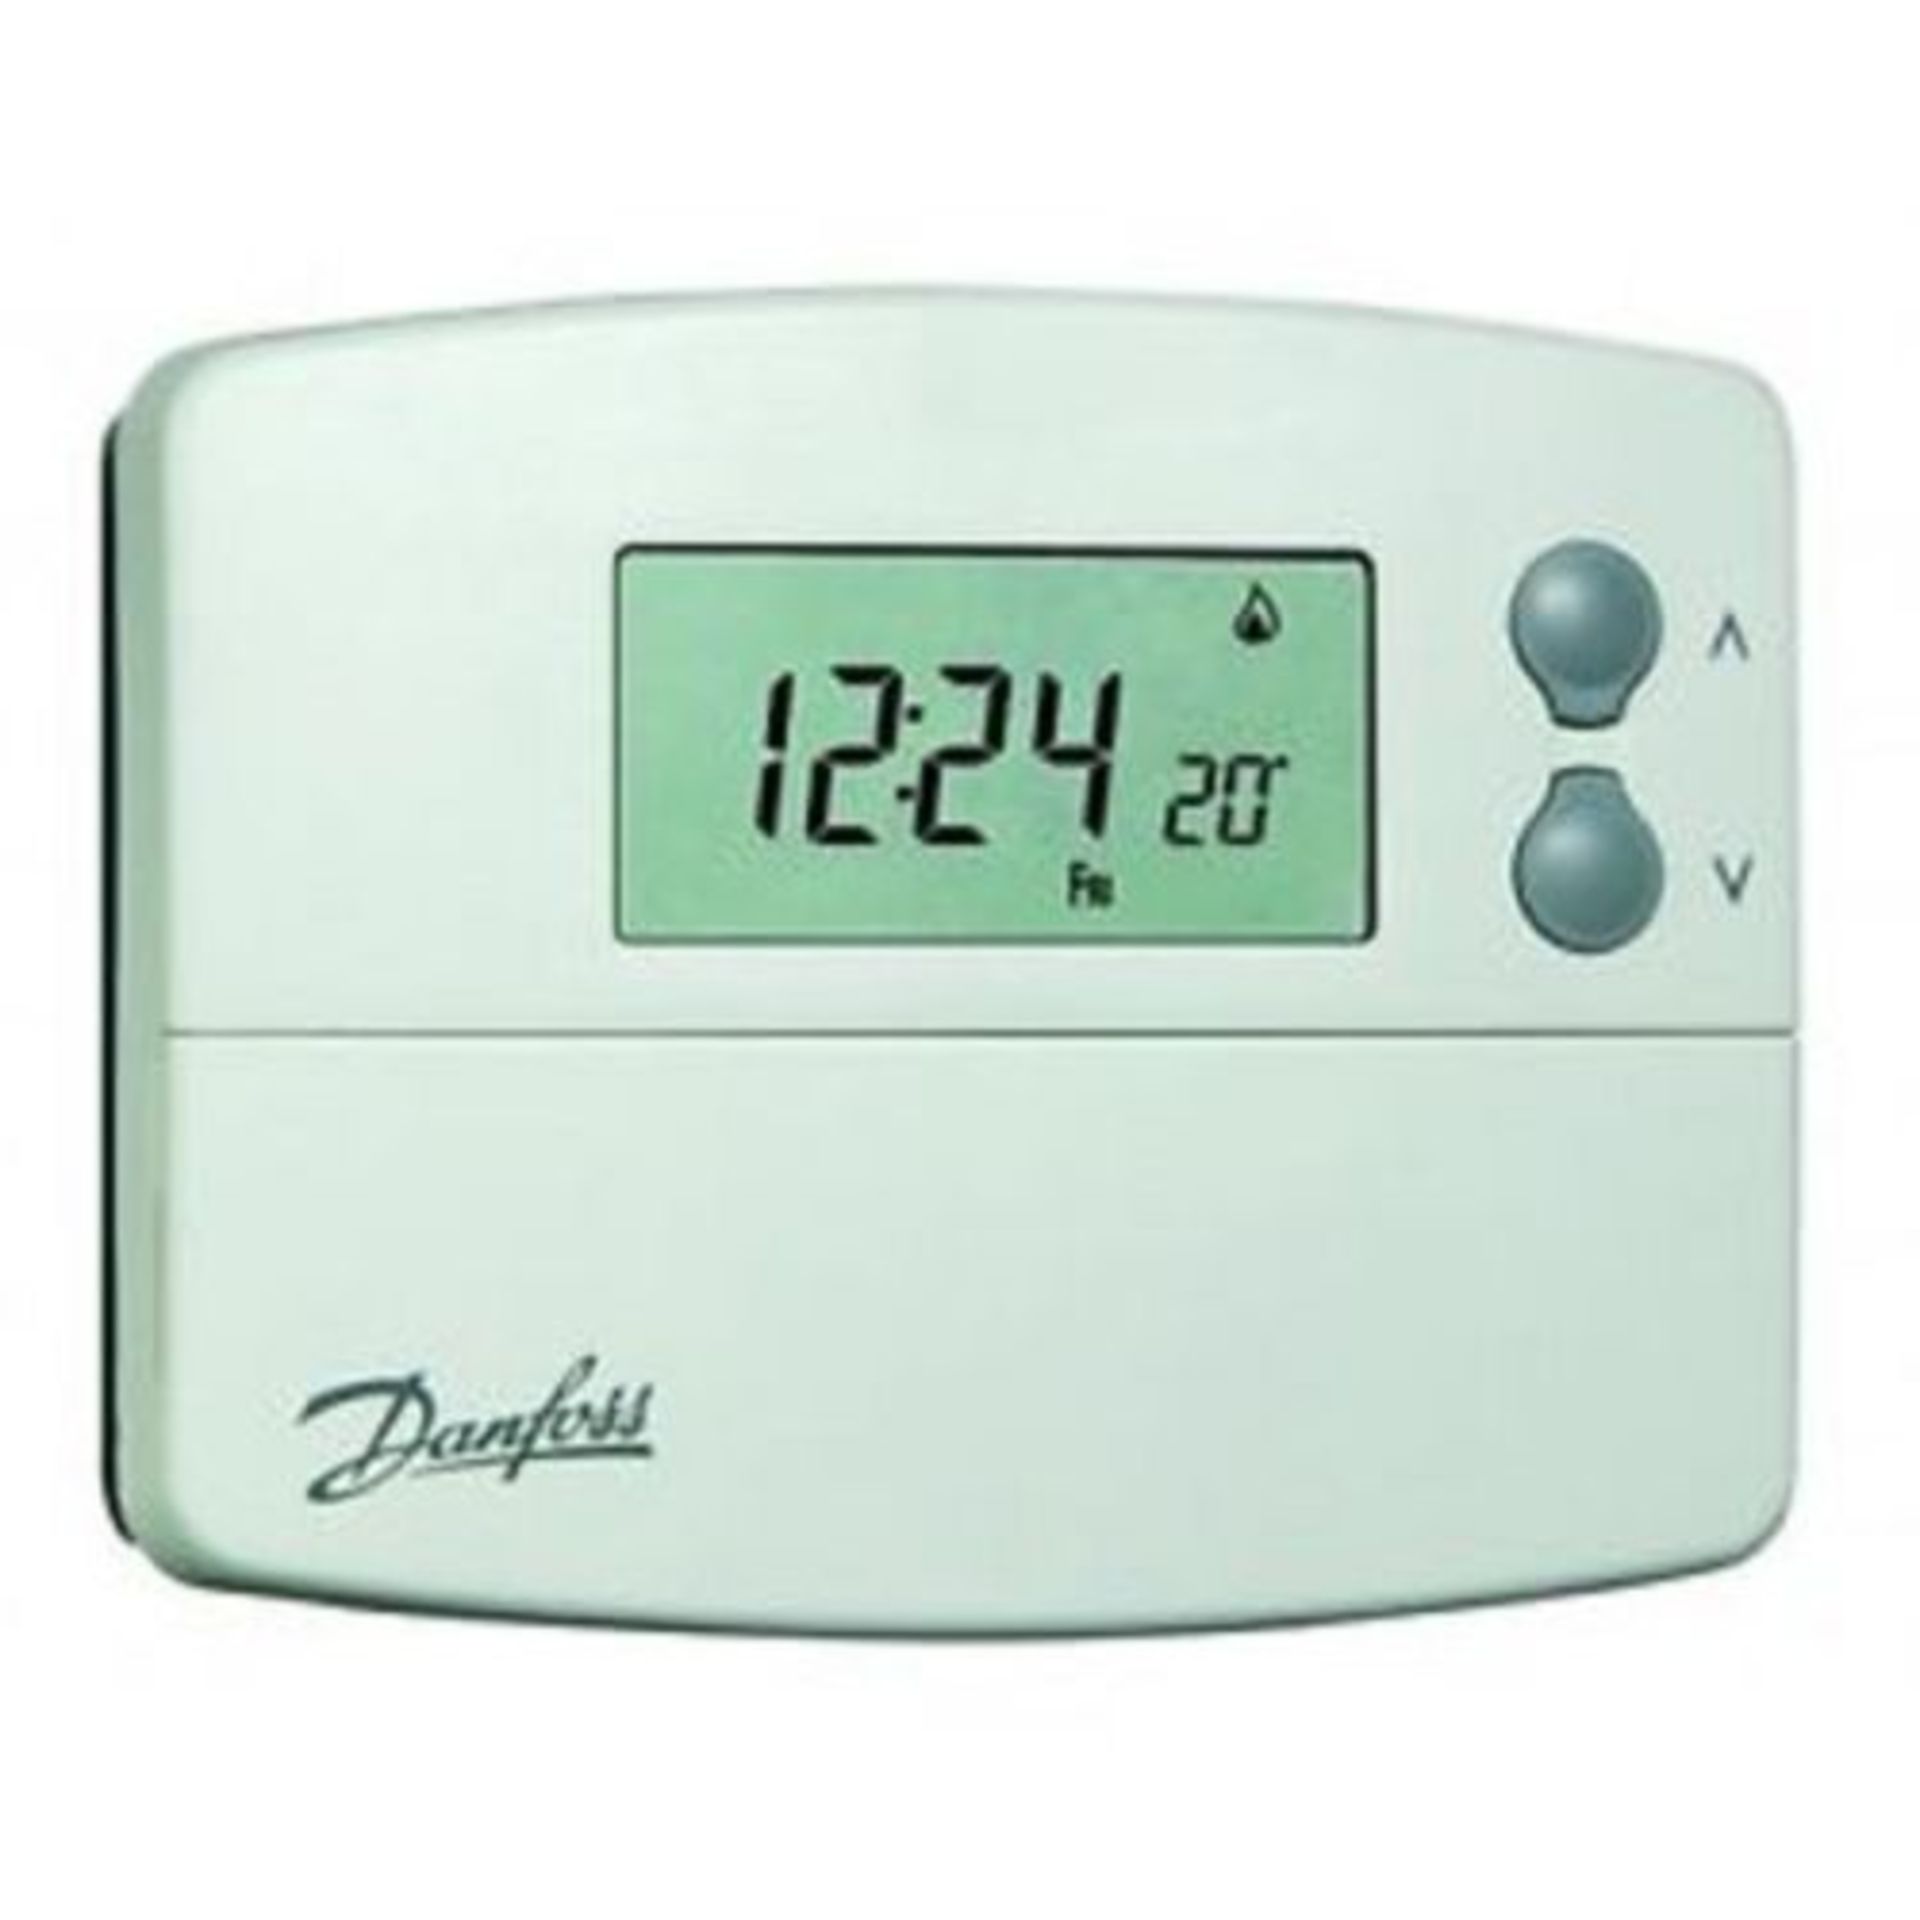 Danfoss Randall TP5000Si 5/2 Day Programmable Room Thermostat 087N791000 - Image 2 of 4